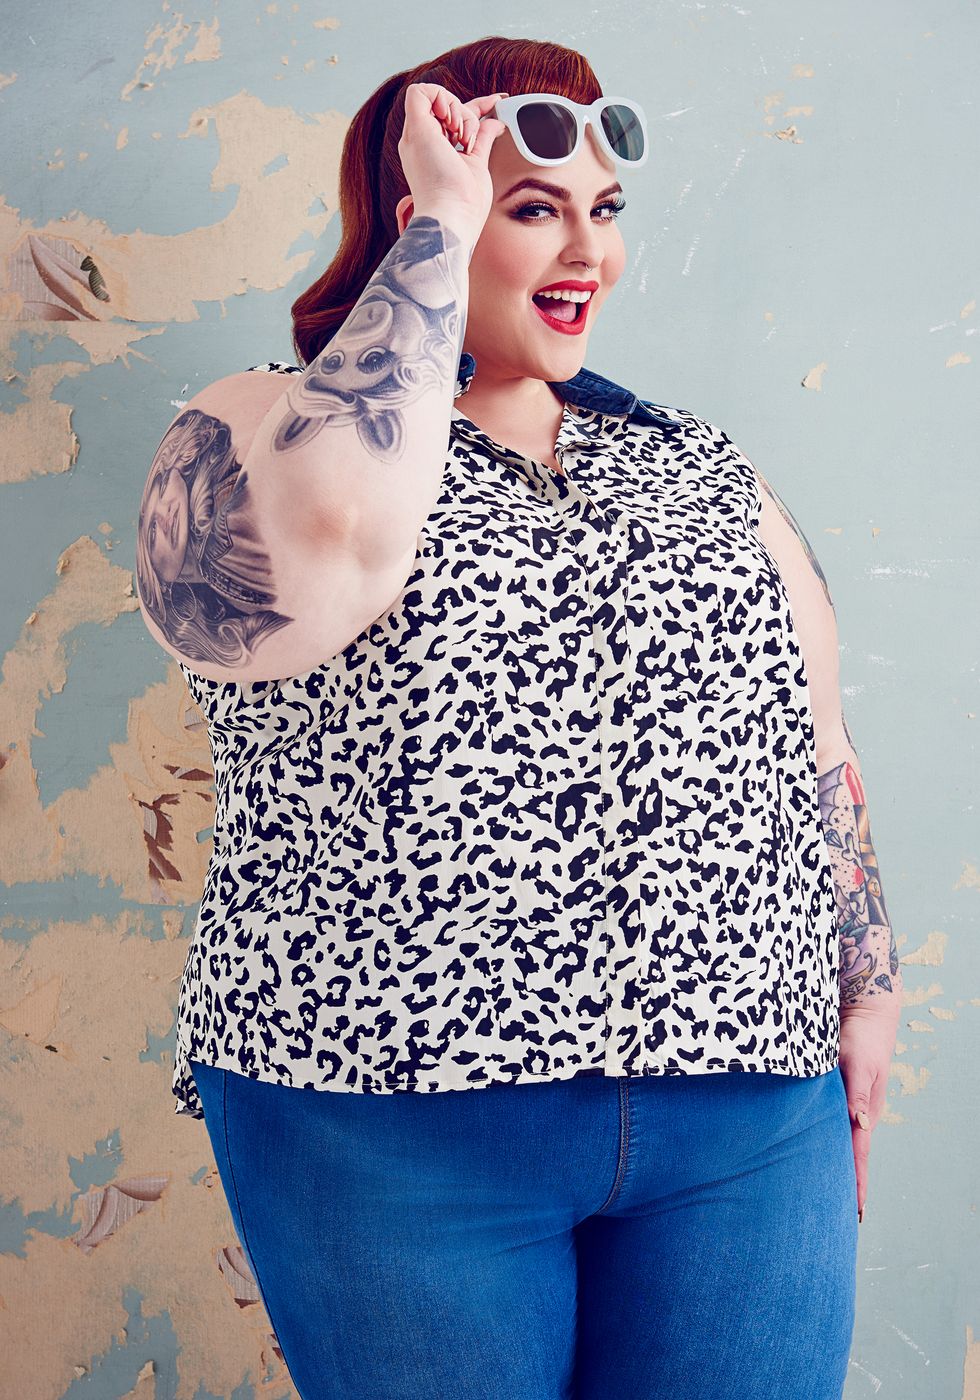 Tess Holliday modelling the Yours Clothing SS15 range